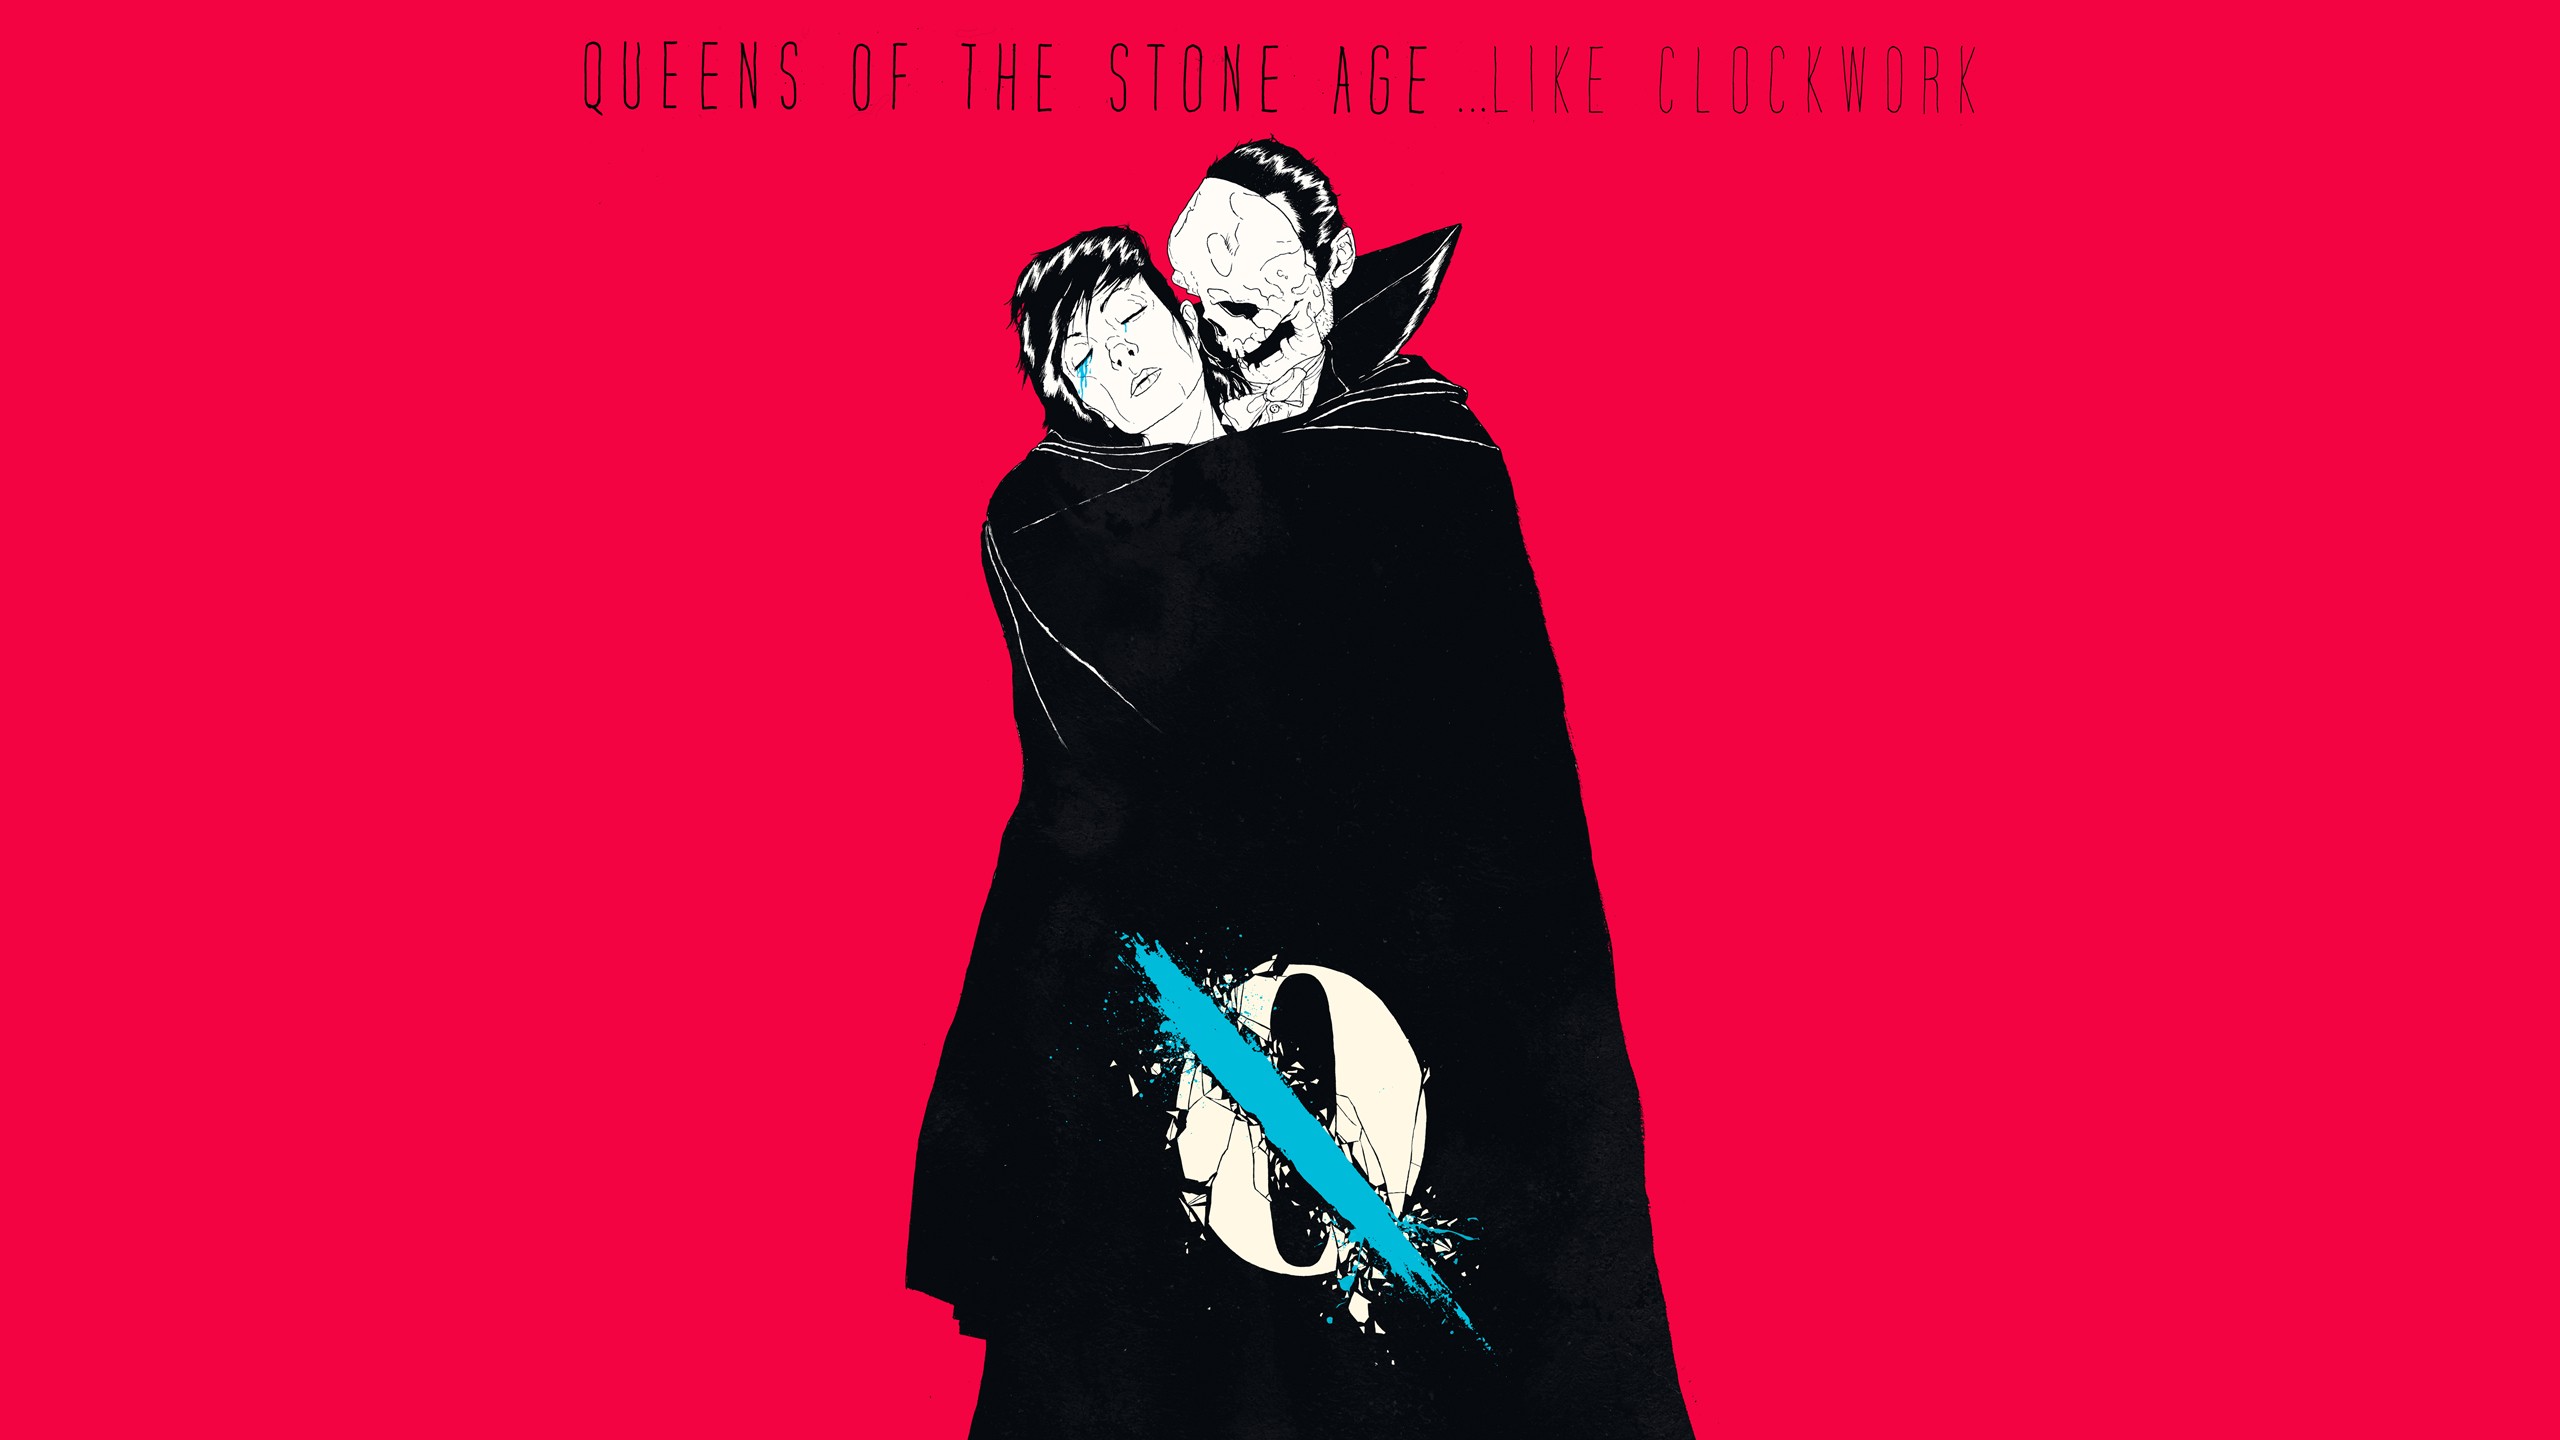 General 2560x1440 Queens of the Stone Age music red background simple background band album covers artwork minimalism closed eyes tears crying mask